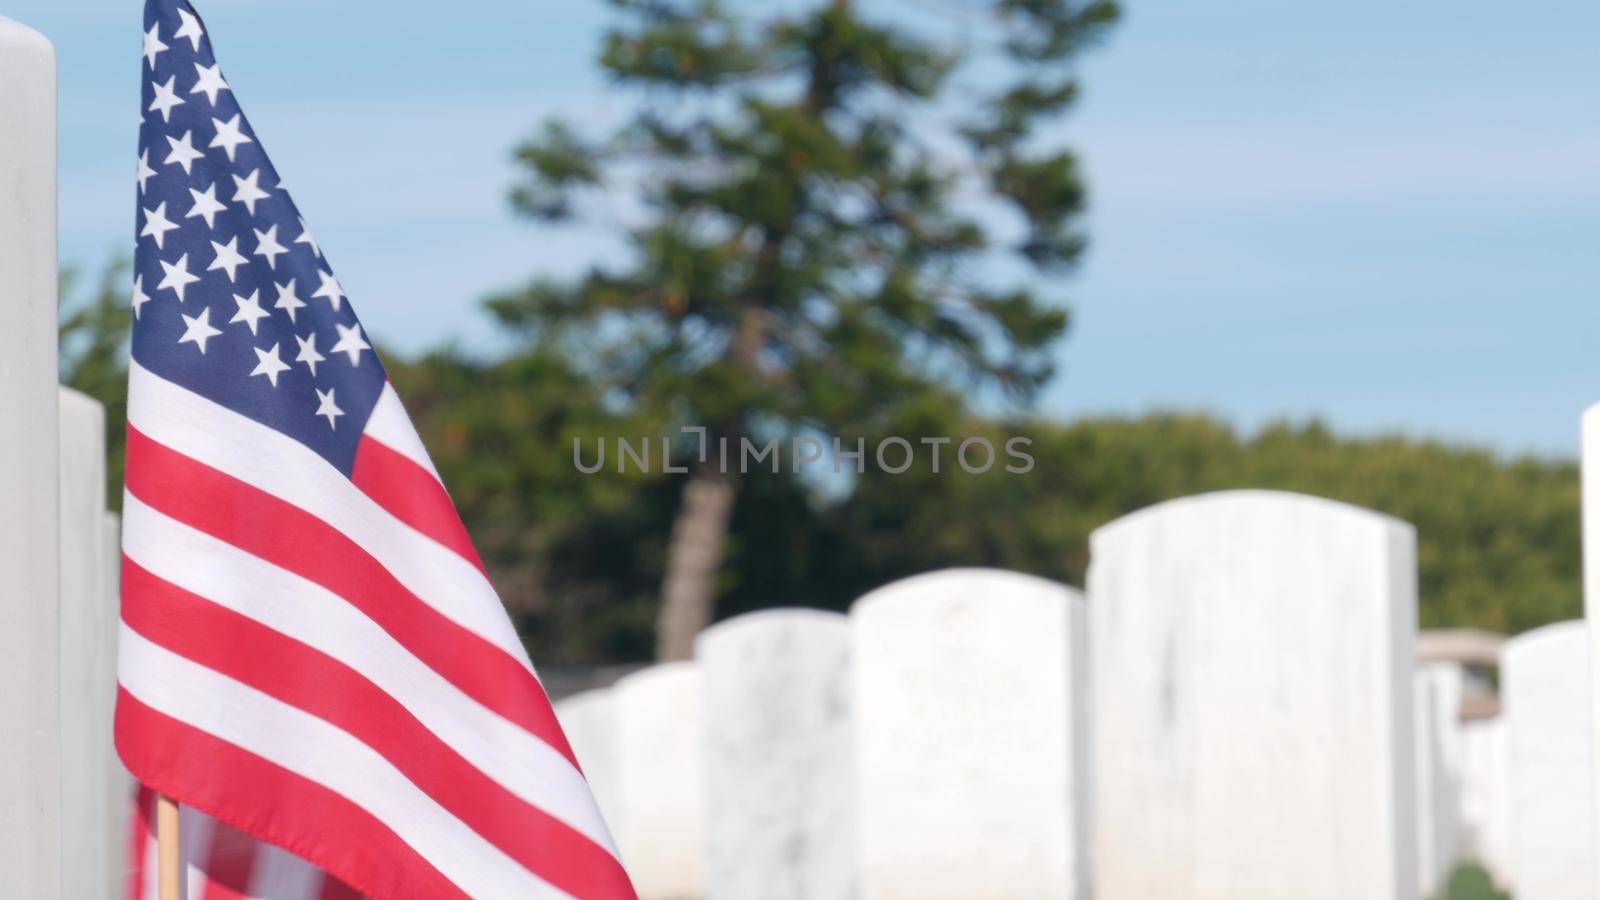 Tombstones and american flag, national military memorial cemetery in USA. by DogoraSun